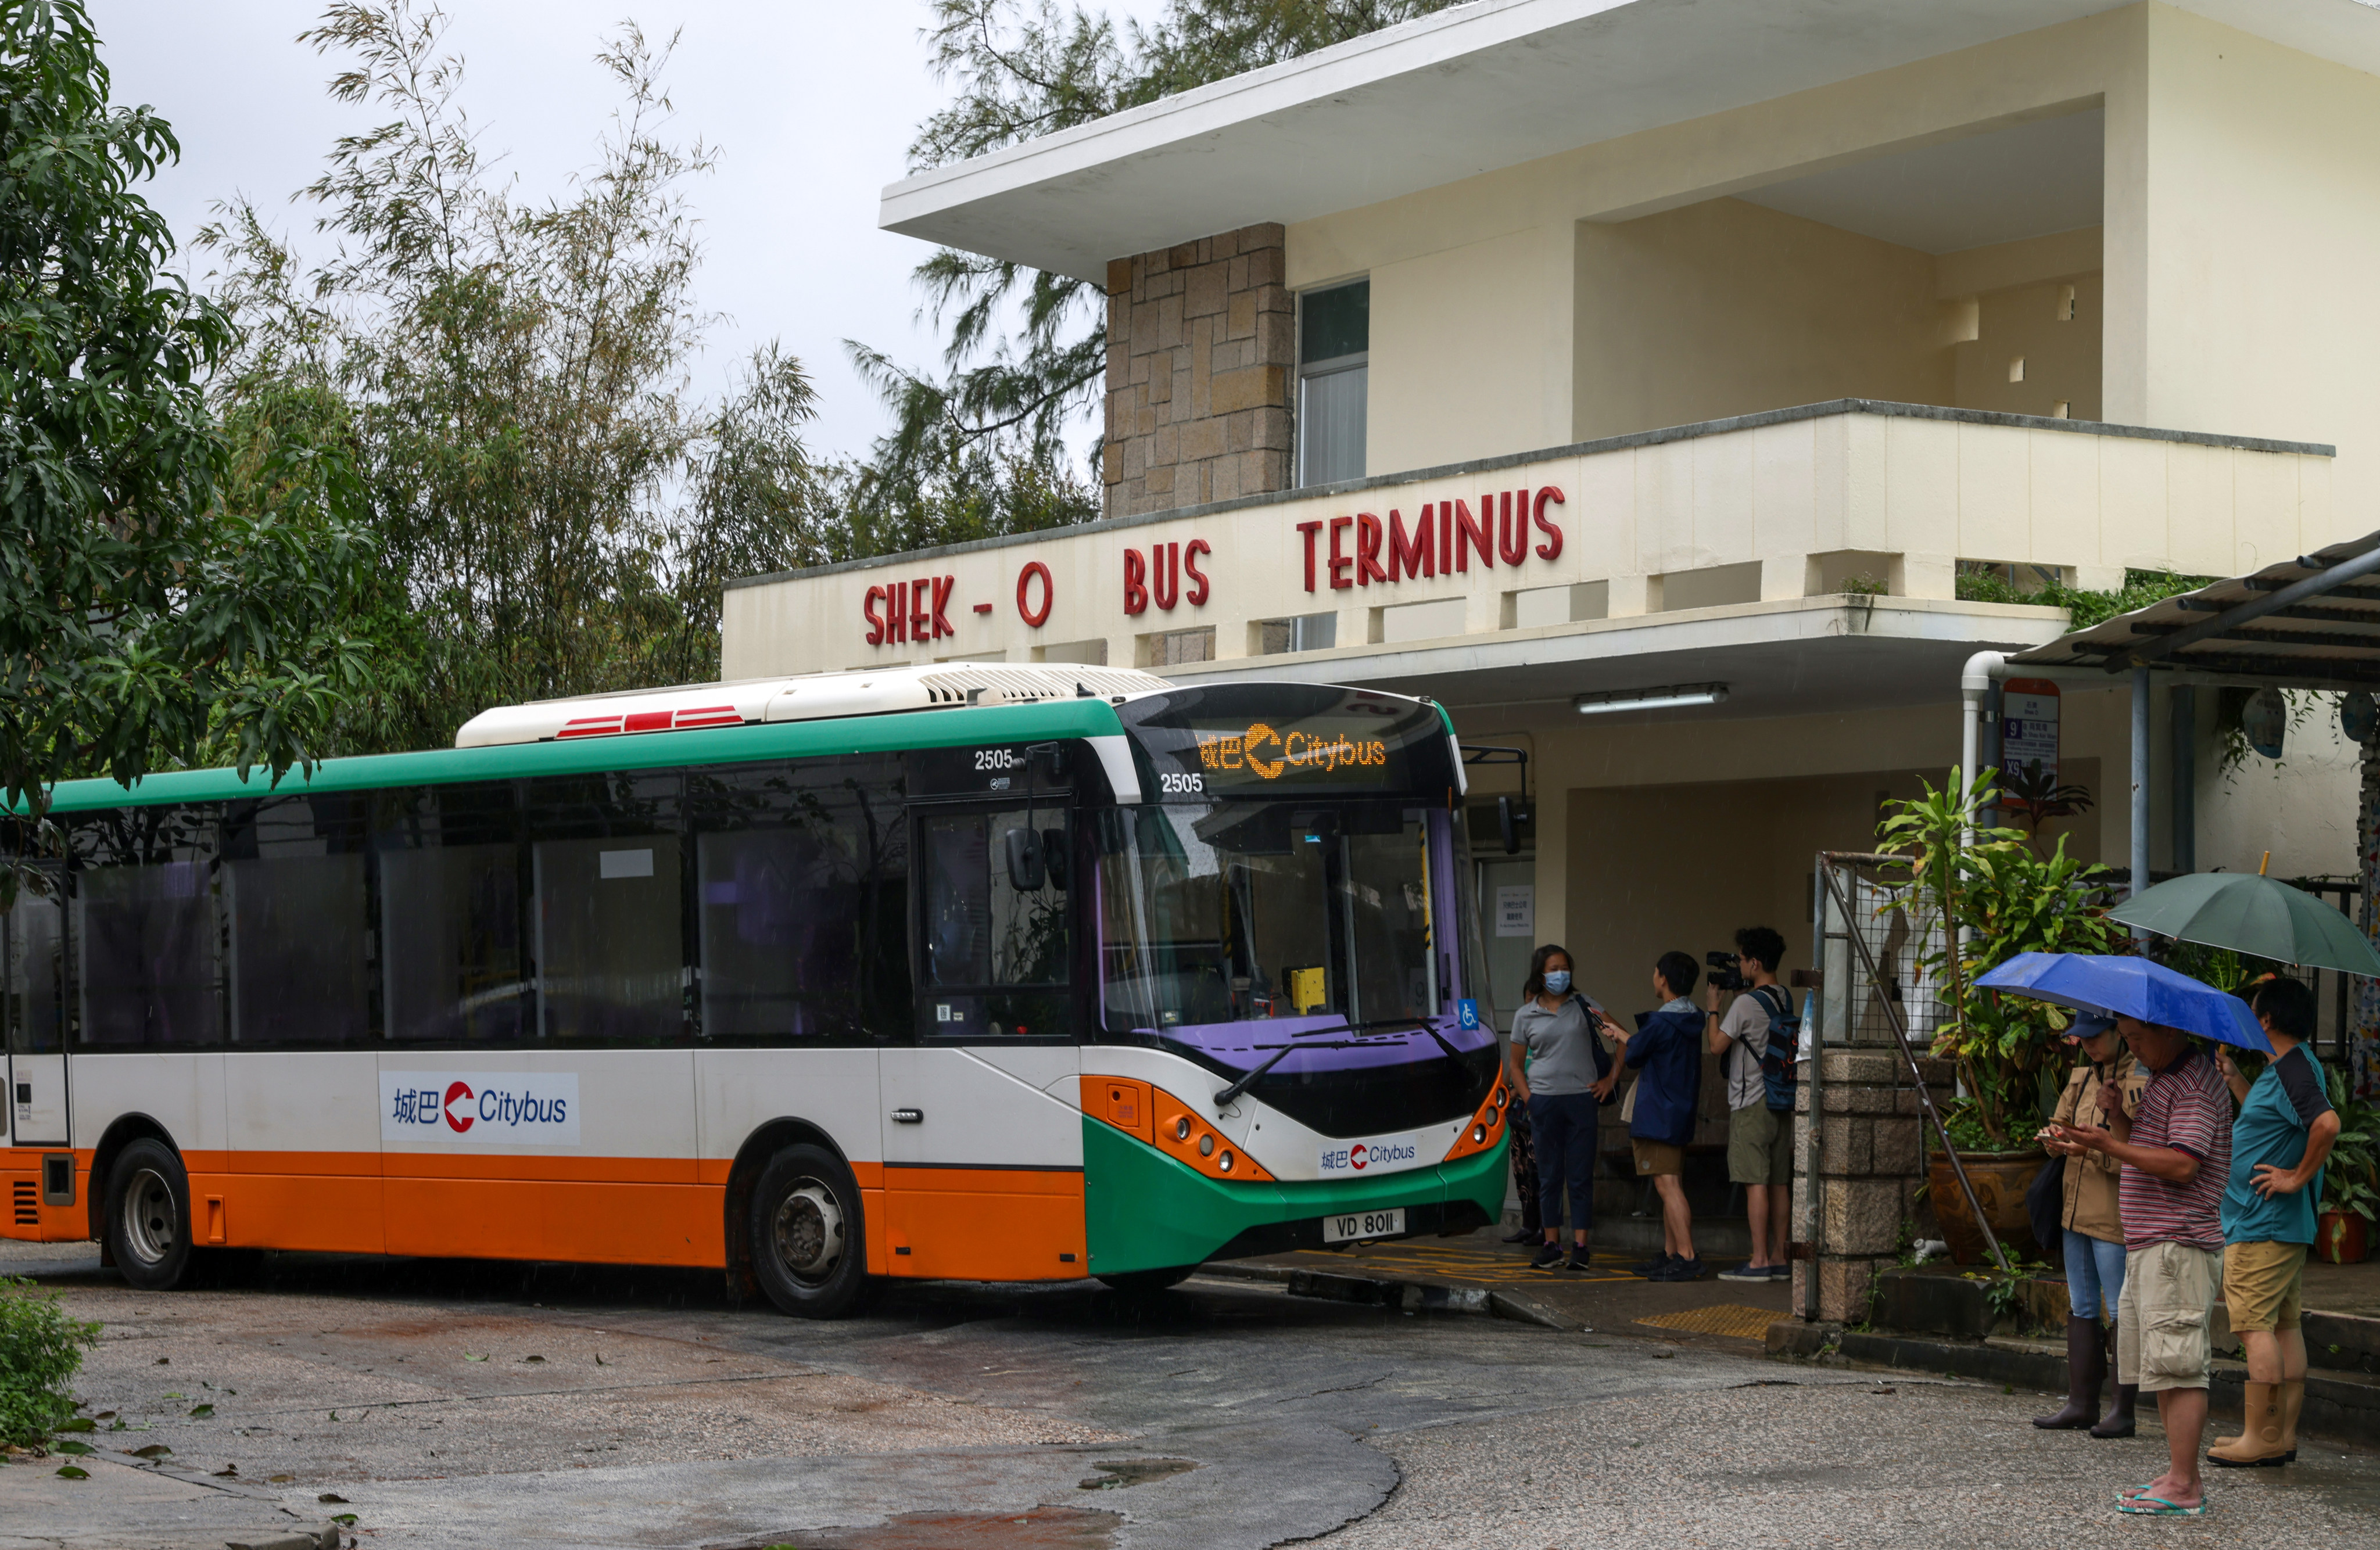 Bus services resumed at Shek O on Sunday, but only on one lane and for single-deckers. Photo: Yik Yeung-man